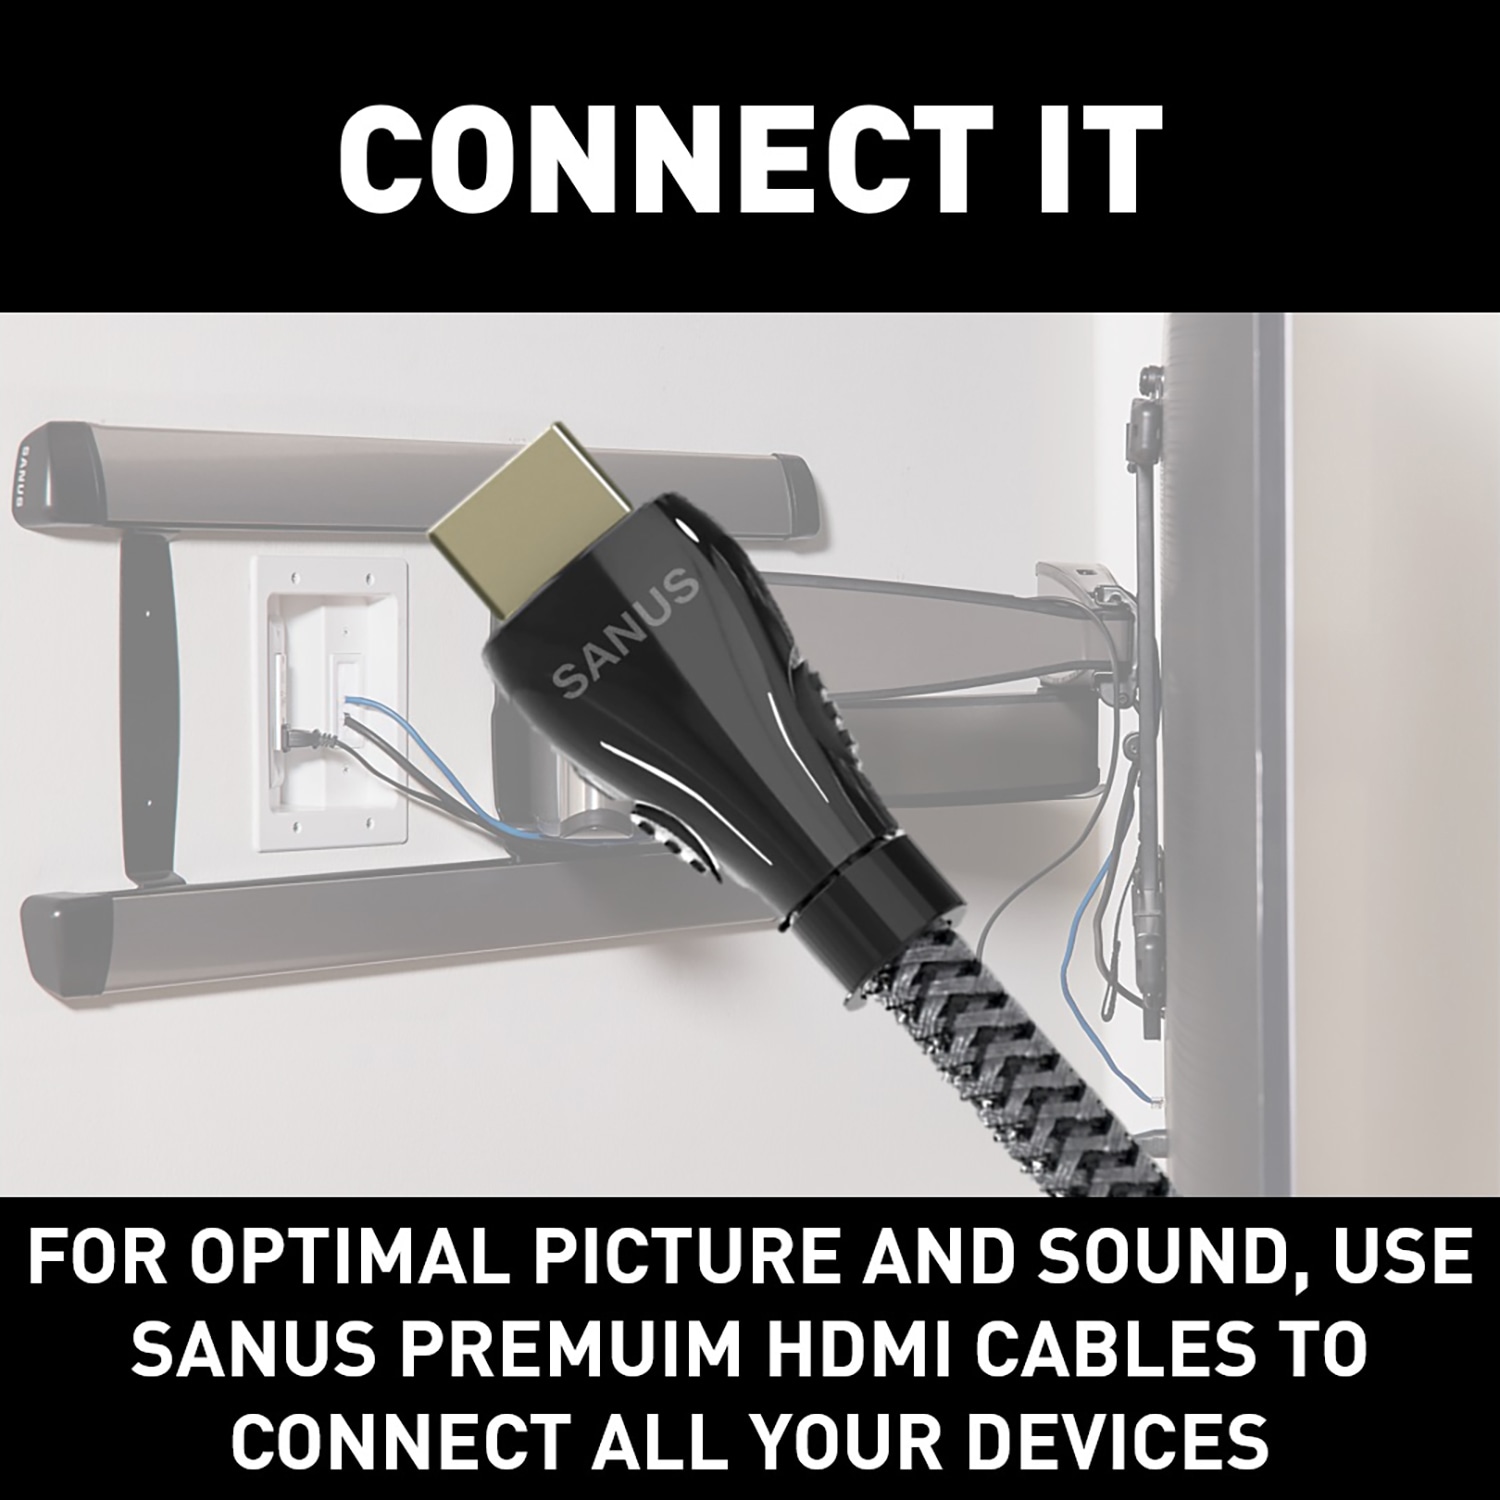 Sanus - On-Wall Cable Concealer High Capacity Cord Cover Kit for Mounted TVs (Holds Up to 6 Cables) - White 6537745